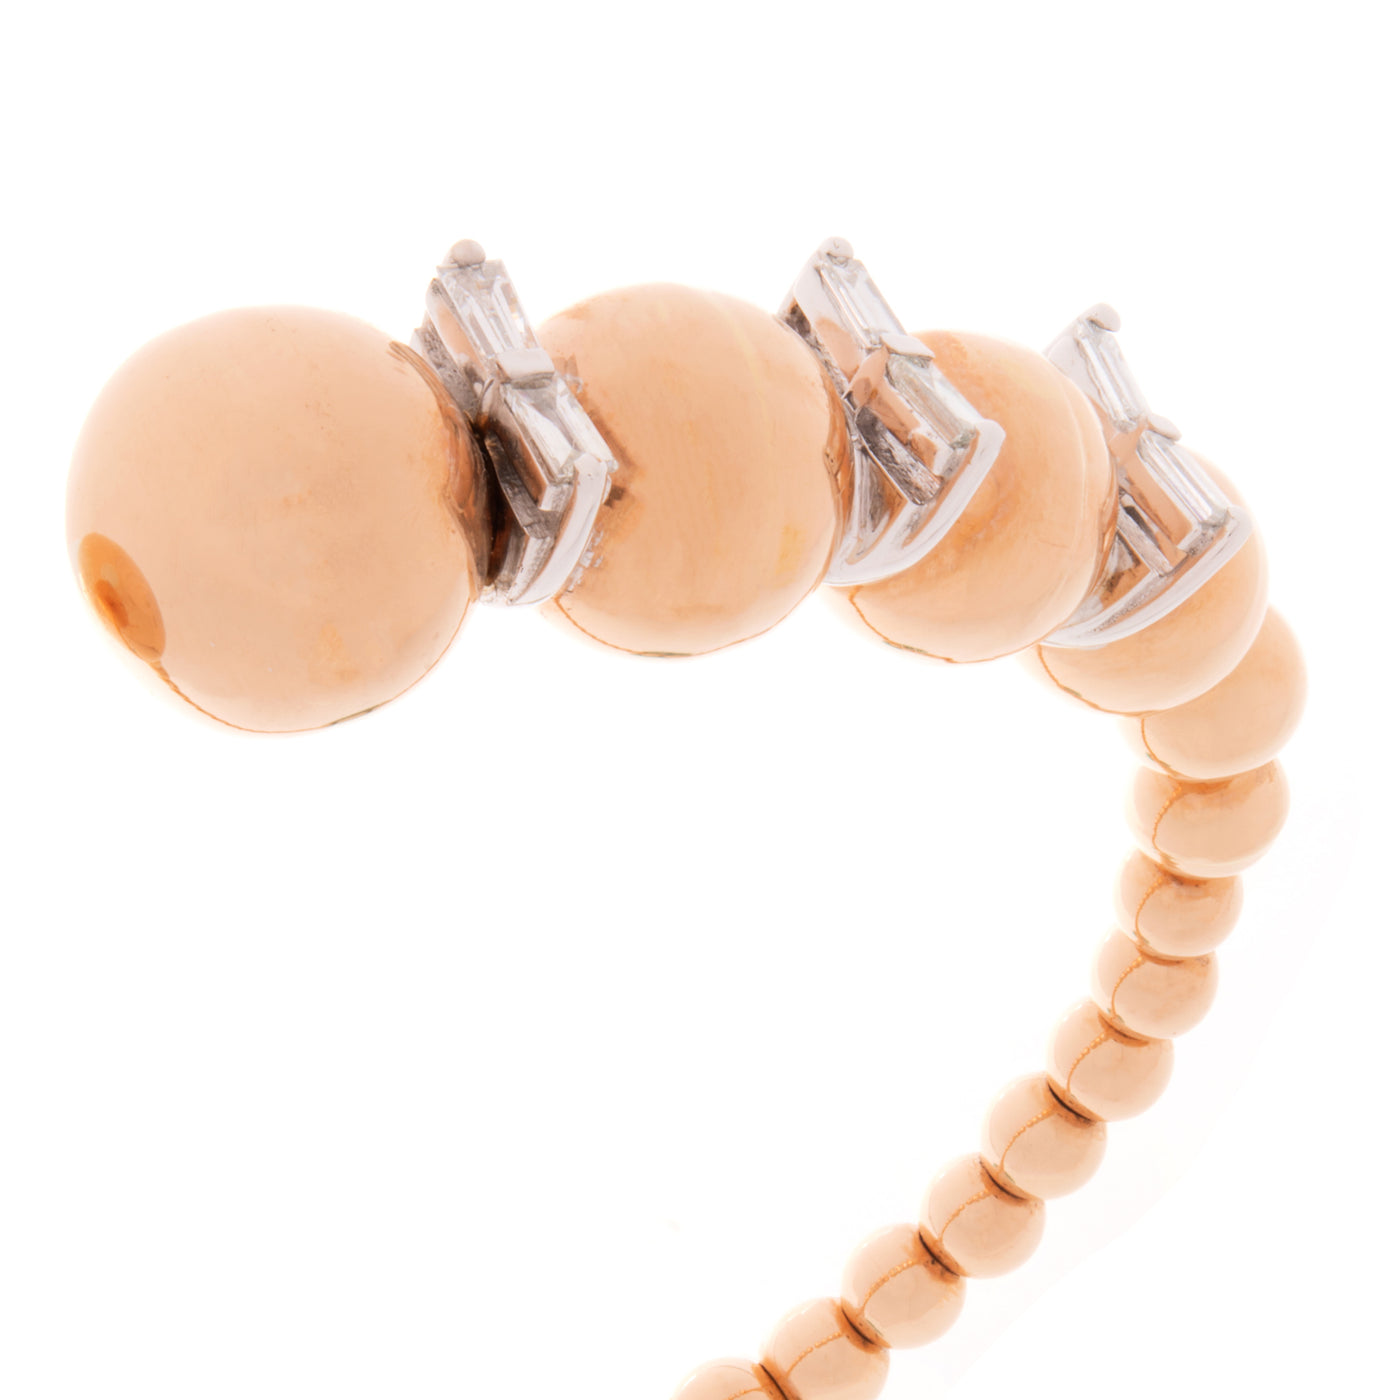 Rose Gold Unusual Size Ball With baguette Diamond Bangle